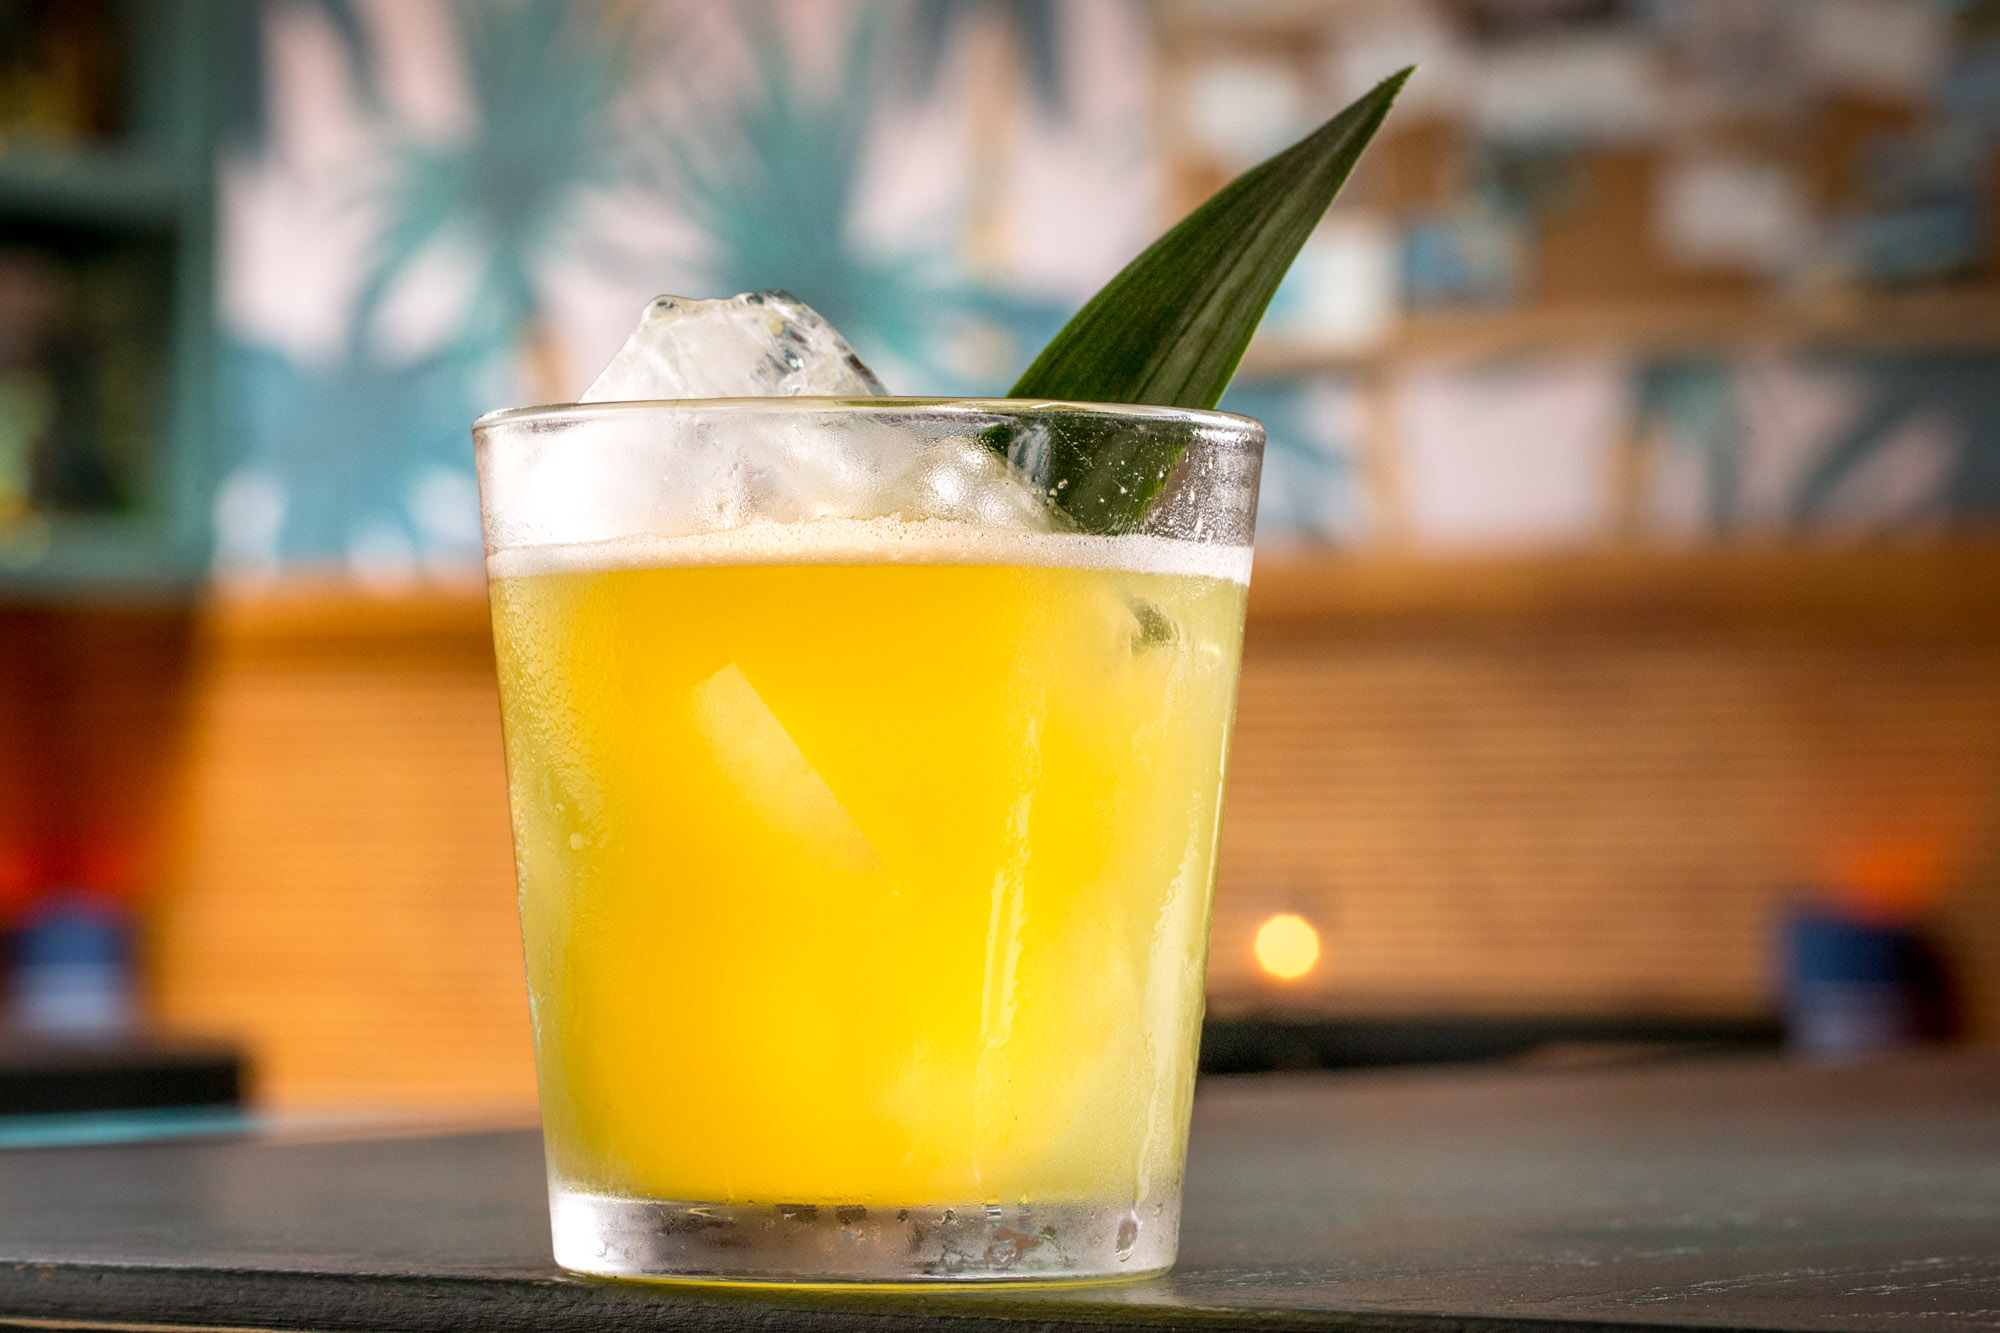 Tropical drinks served in New York City.